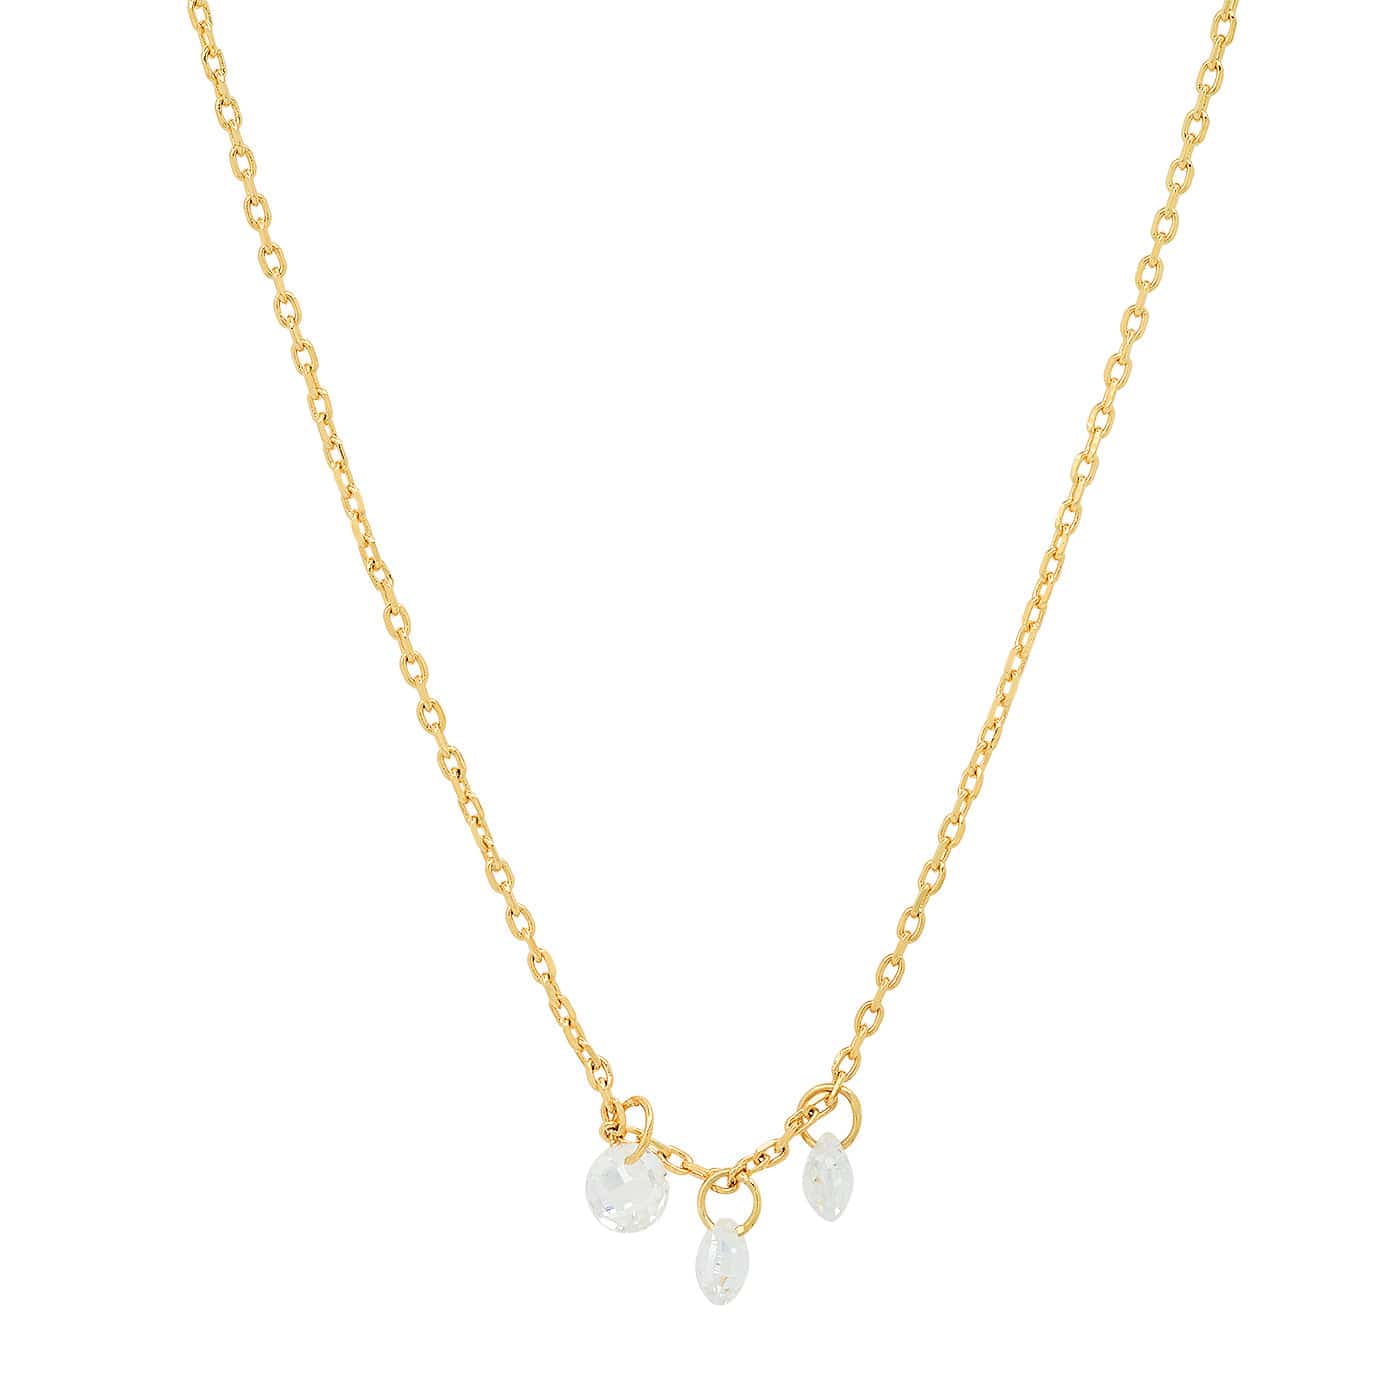 TAI JEWELRY Necklace Gold Delicate Chain Necklace With Three Floating Cz Stones